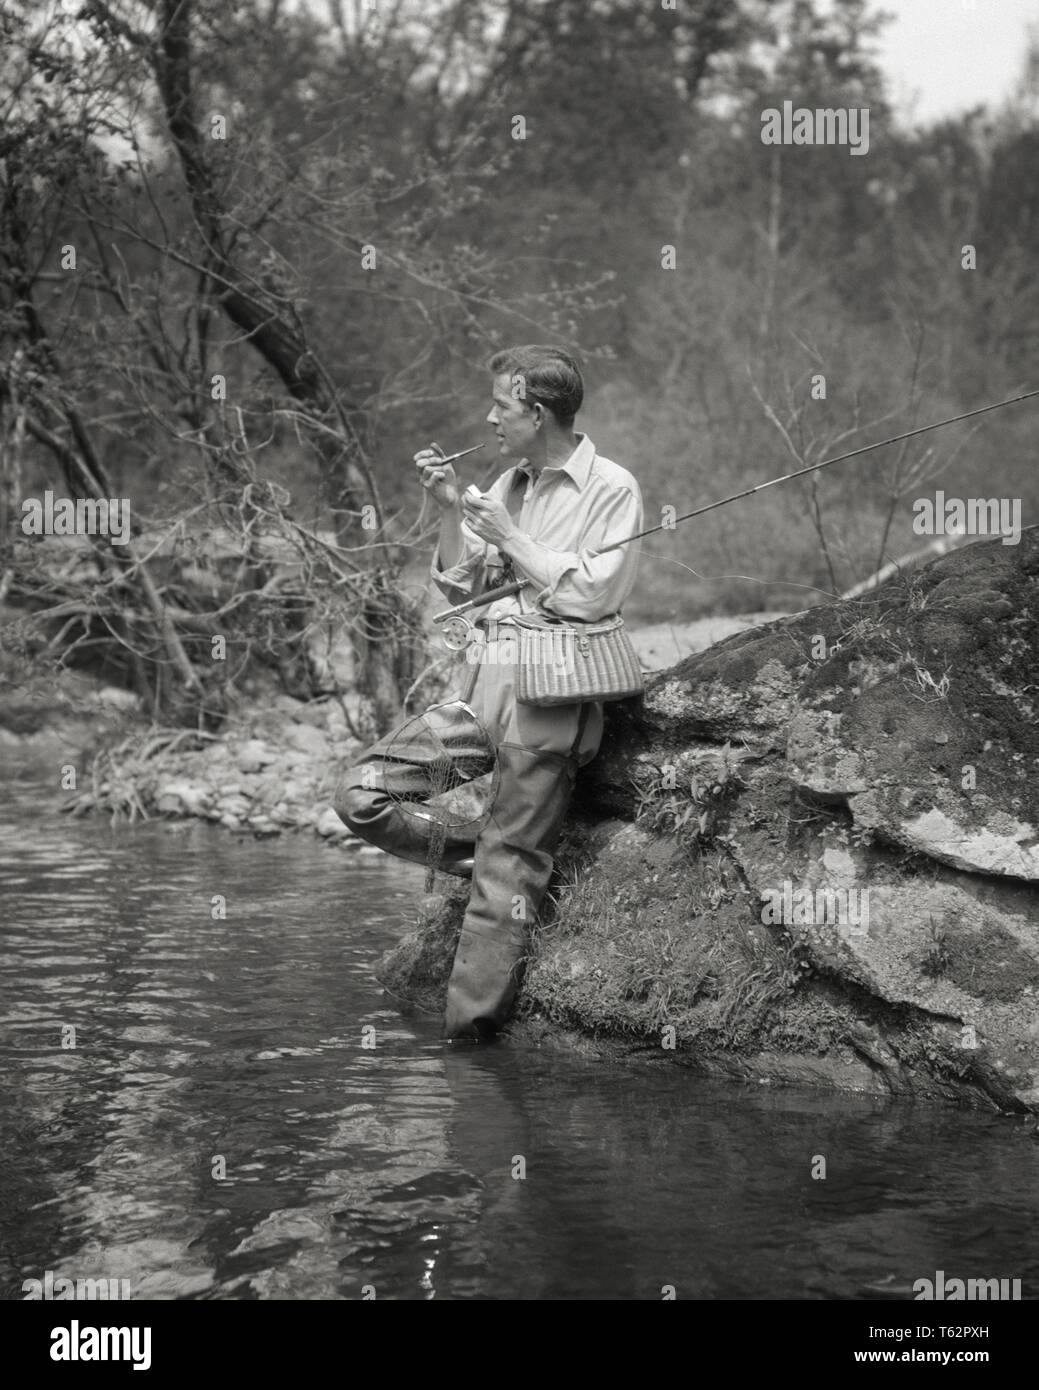 1920s FLY FISHERMAN WEARING WADERS LIGHTING PIPE TAKING A BREAK LEANING ON BOULDER ON BANK OF STREAM - a3361 HAR001 HARS TOBACCO INTEREST HOBBIES KNOWLEDGE RECREATION PASTIME REEL PLEASURE ESCAPE STYLISH WADERS ANGLING MID-ADULT MID-ADULT MAN RELAXATION AMATEUR BLACK AND WHITE BOULDER CAUCASIAN ETHNICITY CREEL ENJOYMENT HAR001 OLD FASHIONED Stock Photo